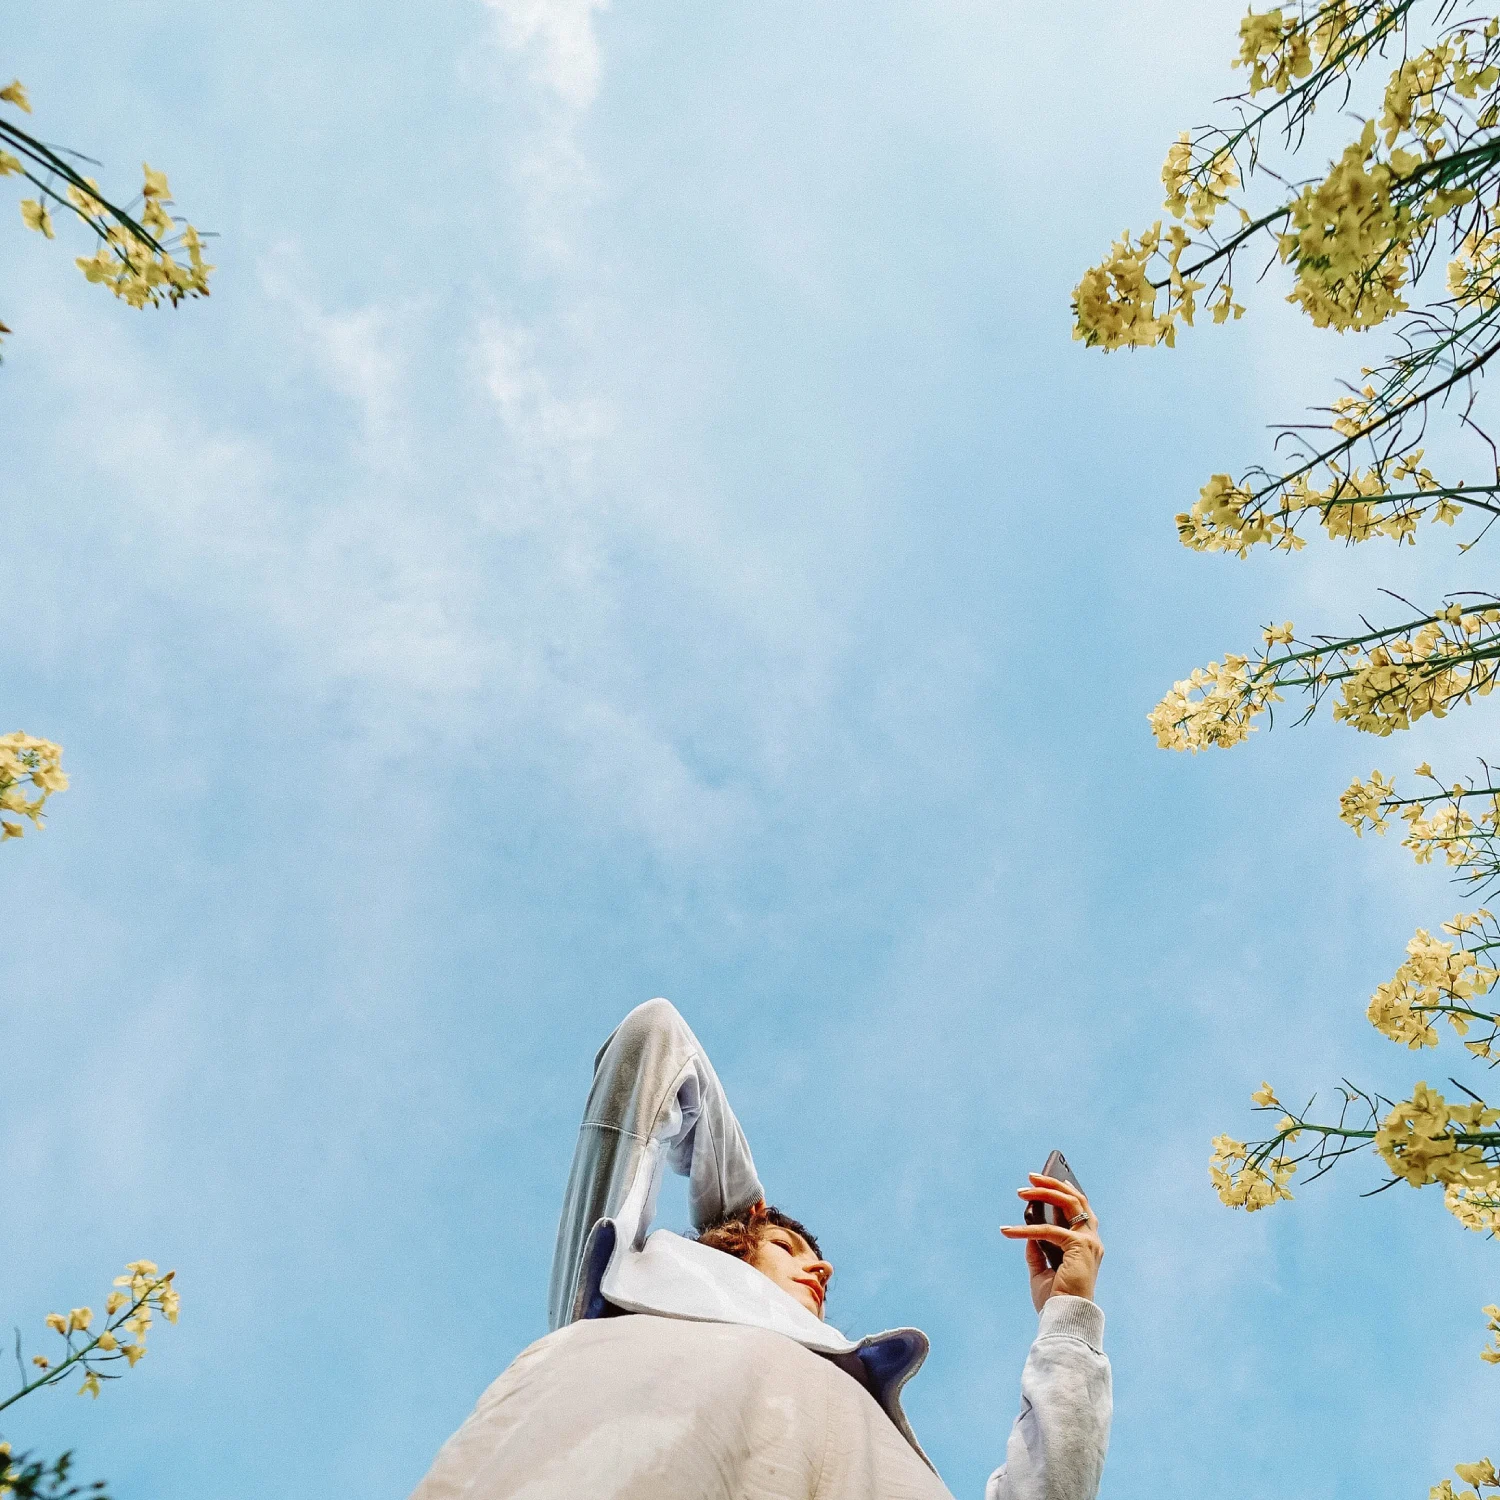 Looking up at a person holding a phone against a blue sky, with yellow flowers on branches in the foreground.